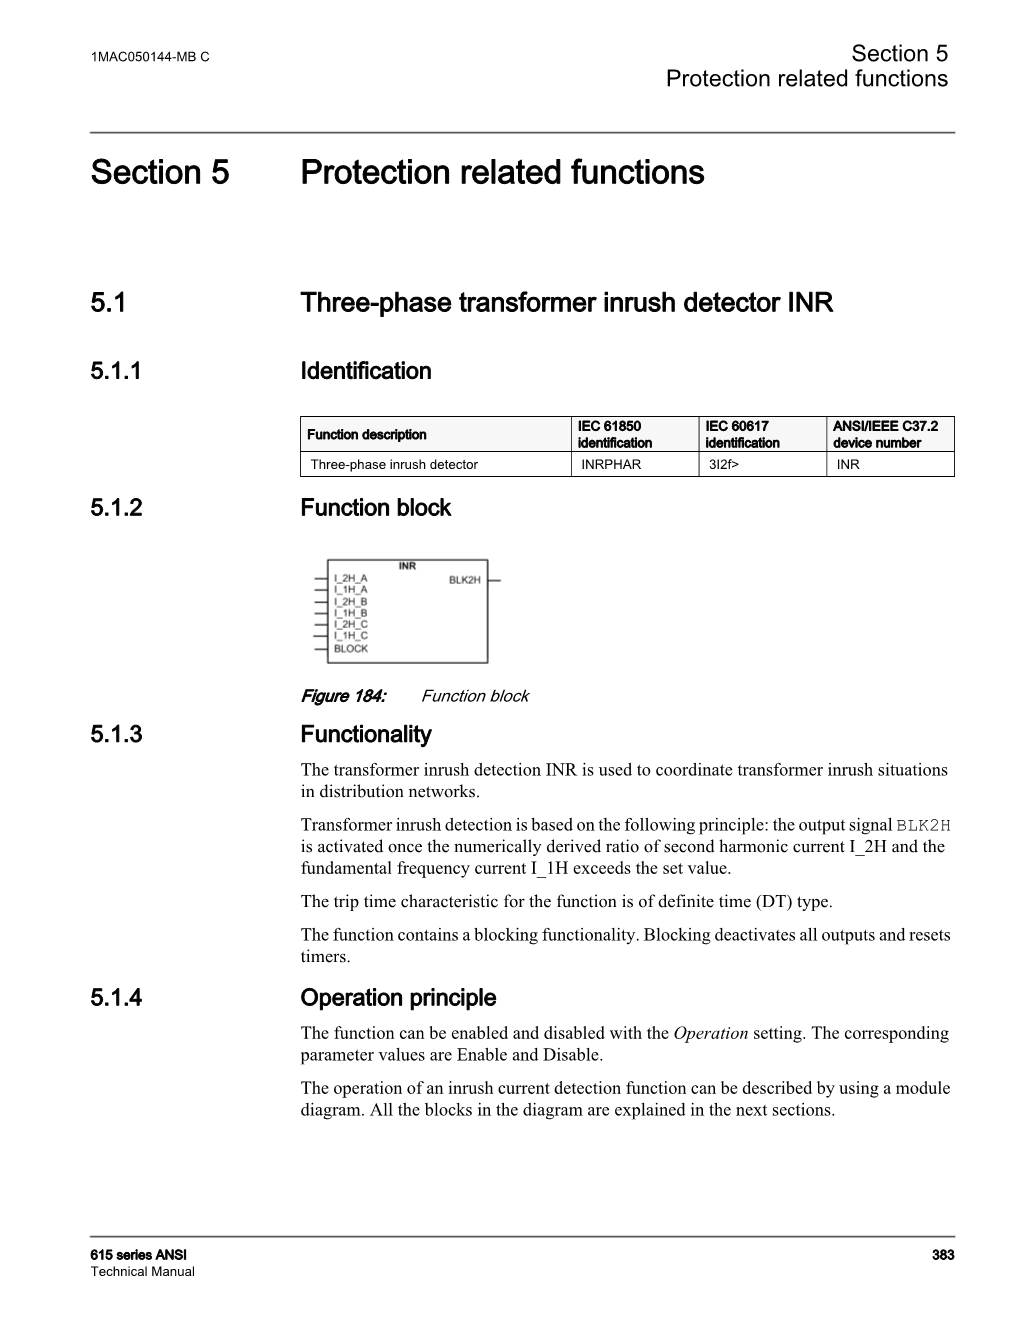 Section 5 Protection Related Functions